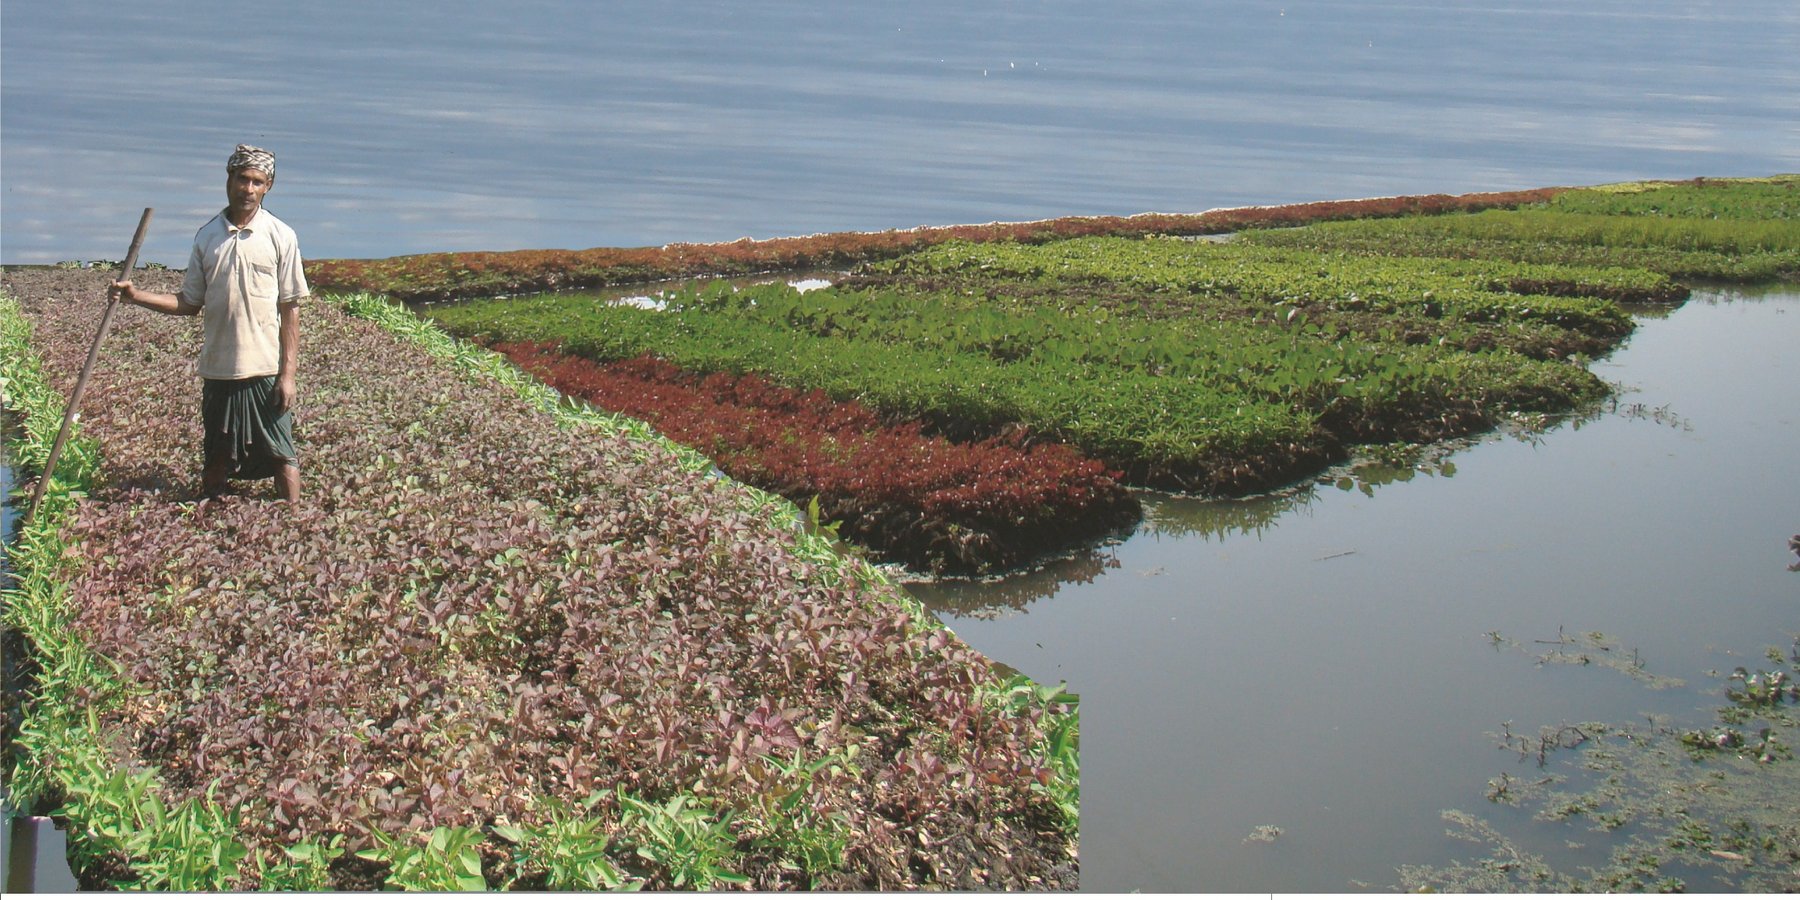 Floating gardens in the wetlands (locally called "Haor" a low lying water body), which serve for vegetable cultivation.